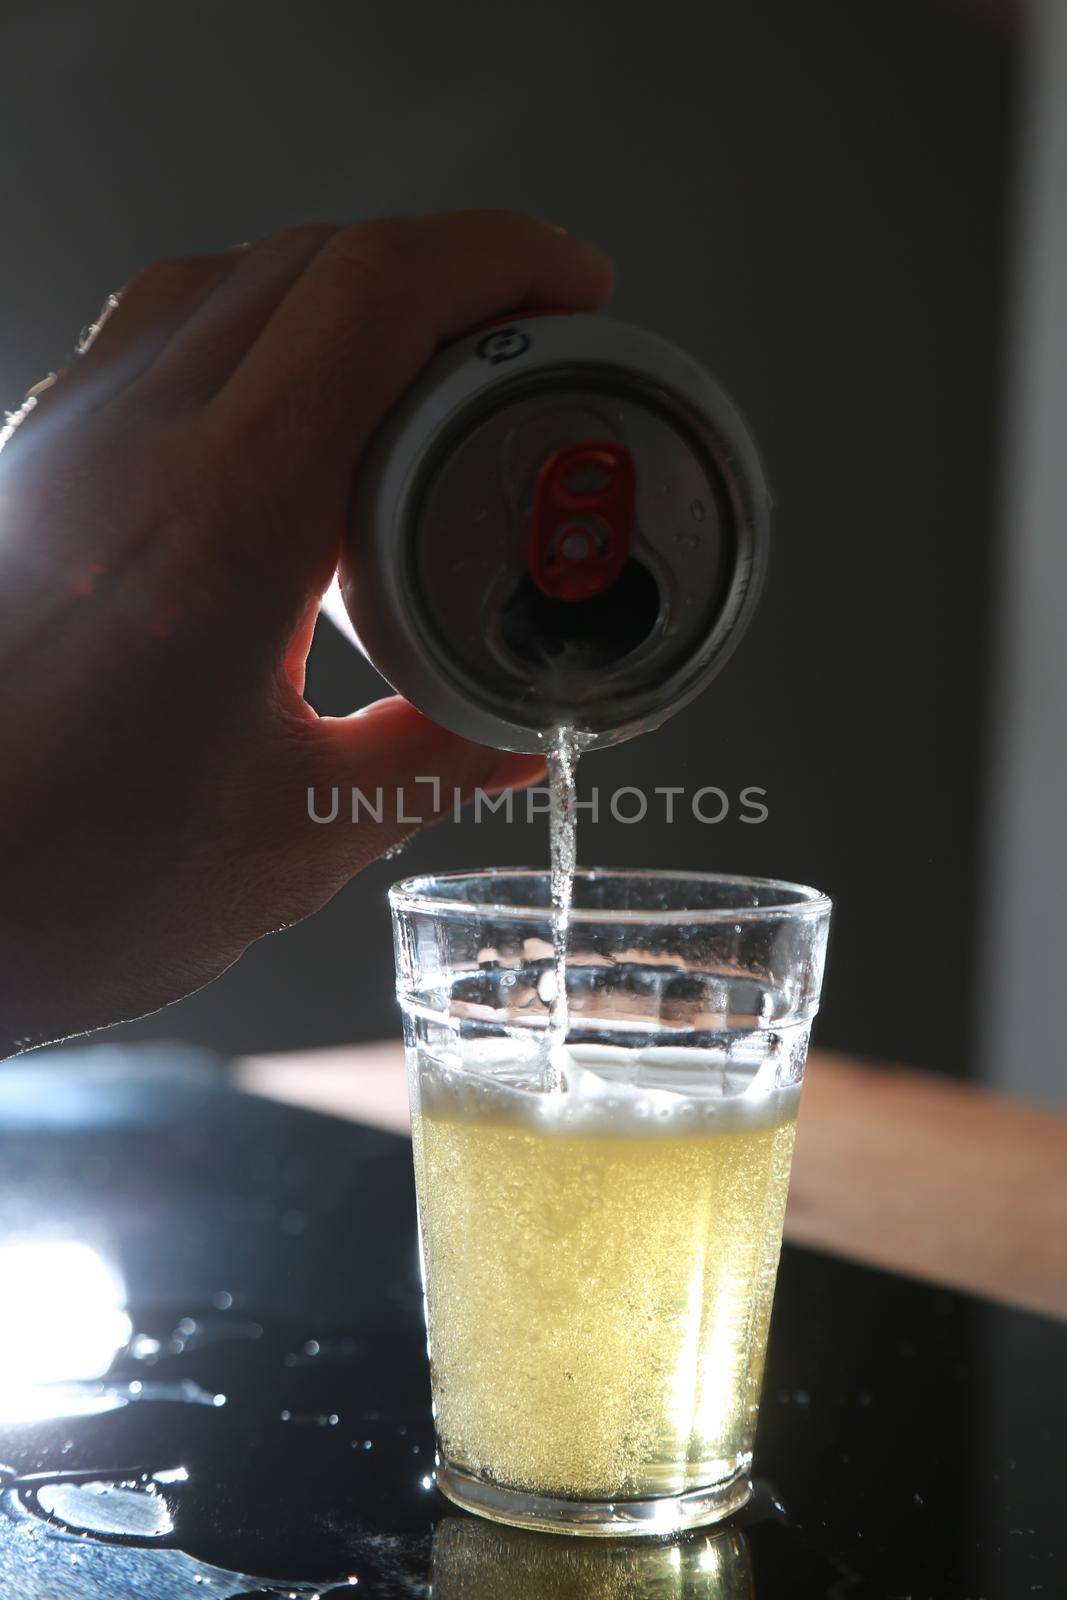 salvador, bahia / brazil - june 29, 2015: Beer bottle on bar table next to a driver's license and vehicle key, symbolizing drink consumption by vehicle drivers.